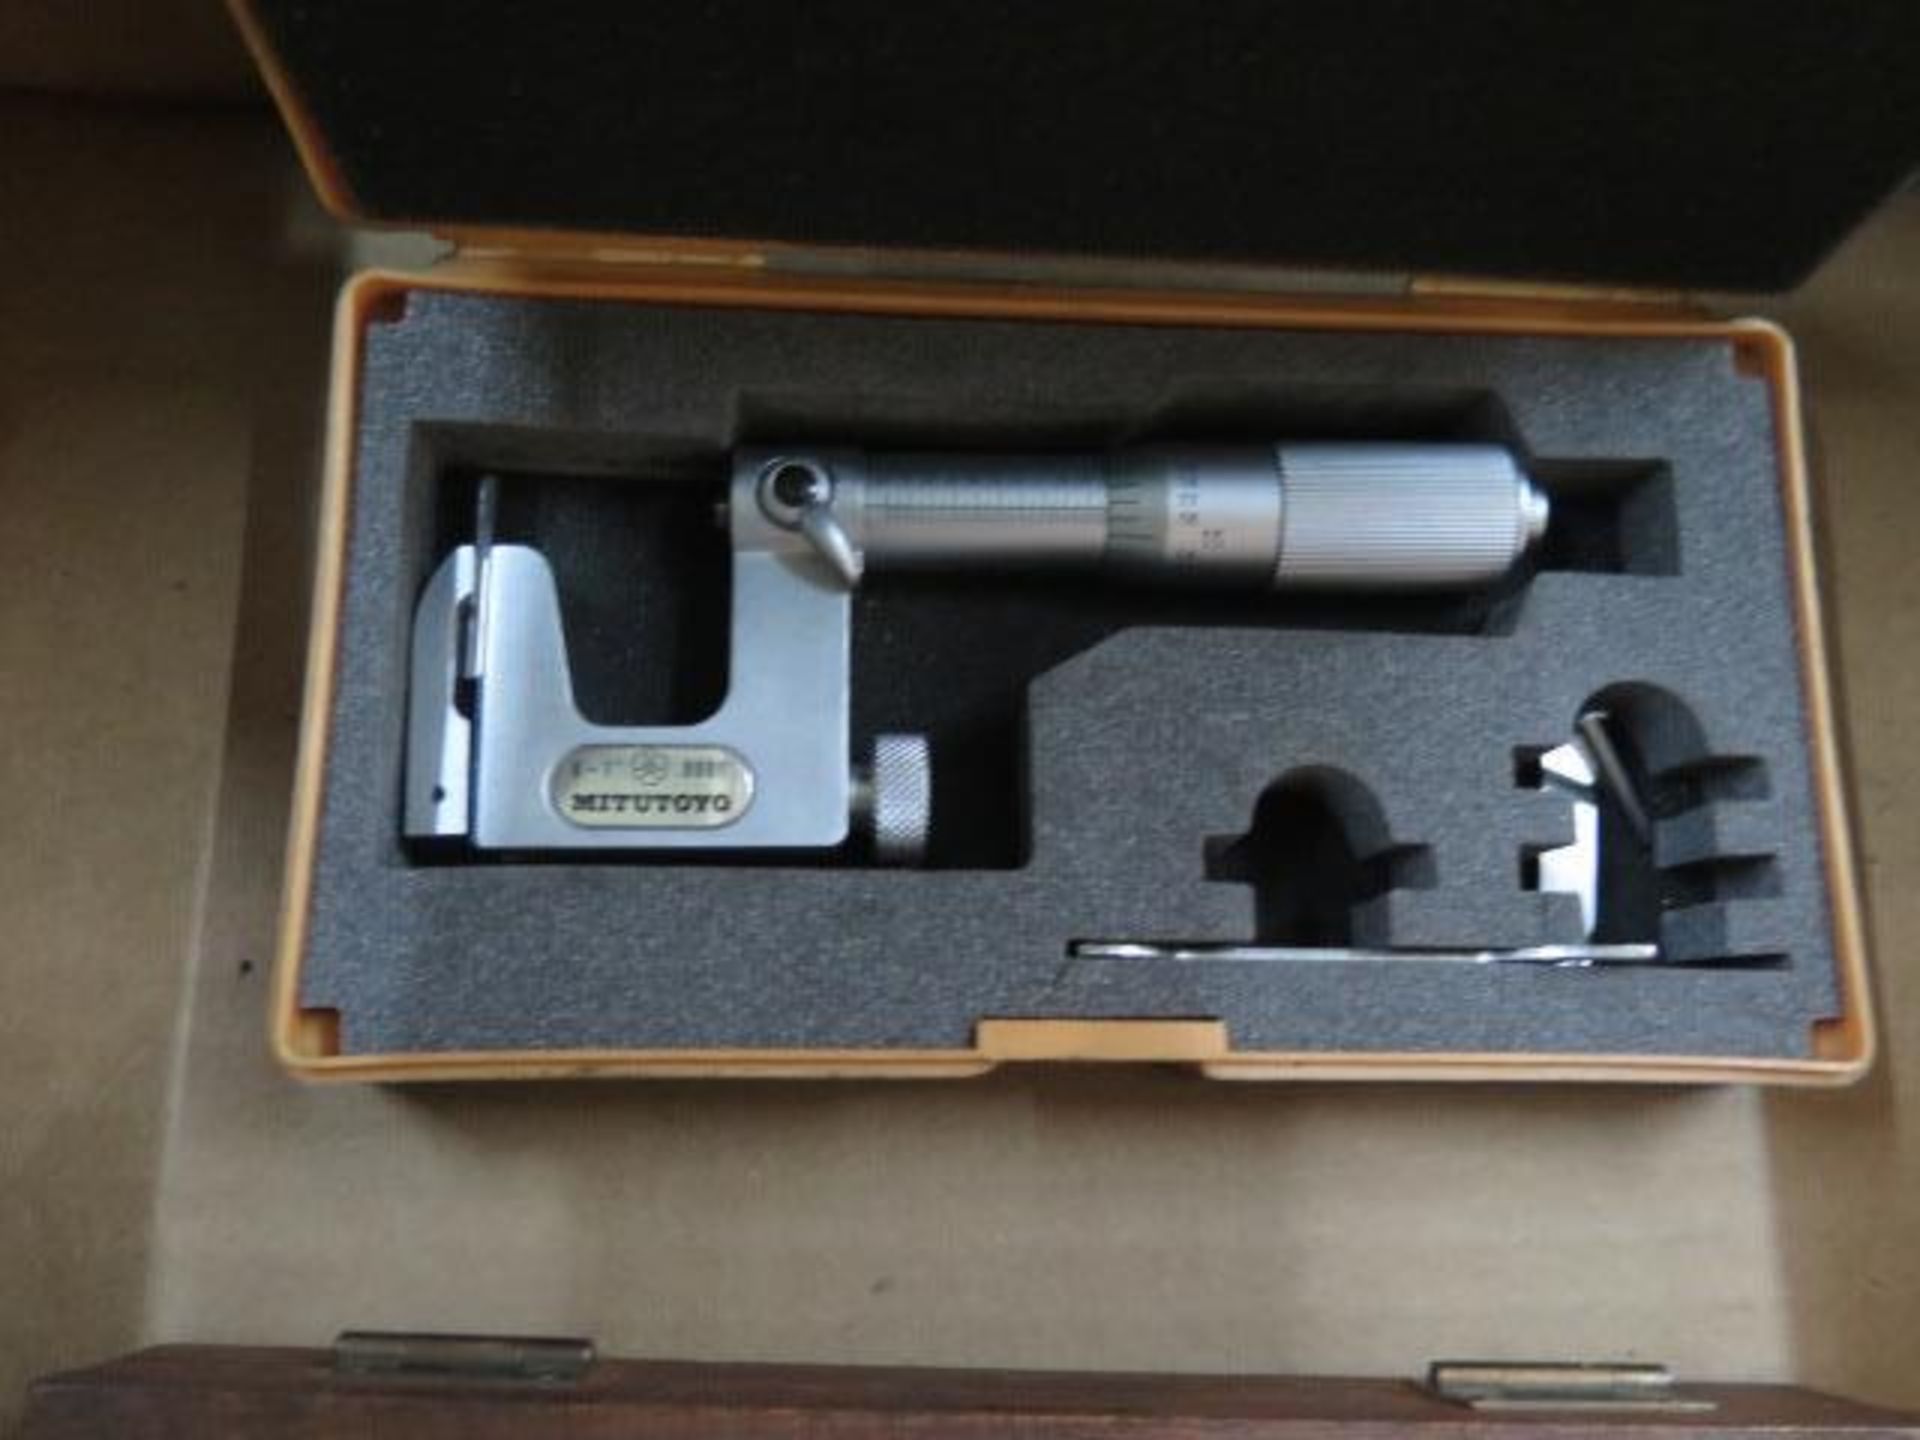 Mitutoyo 0-1" Anvil Mic, NSK 1.5"-19" Bore Mic and Import 0-1" OD Mic (SOLD AS-IS - NO WARRANTY) - Image 2 of 3